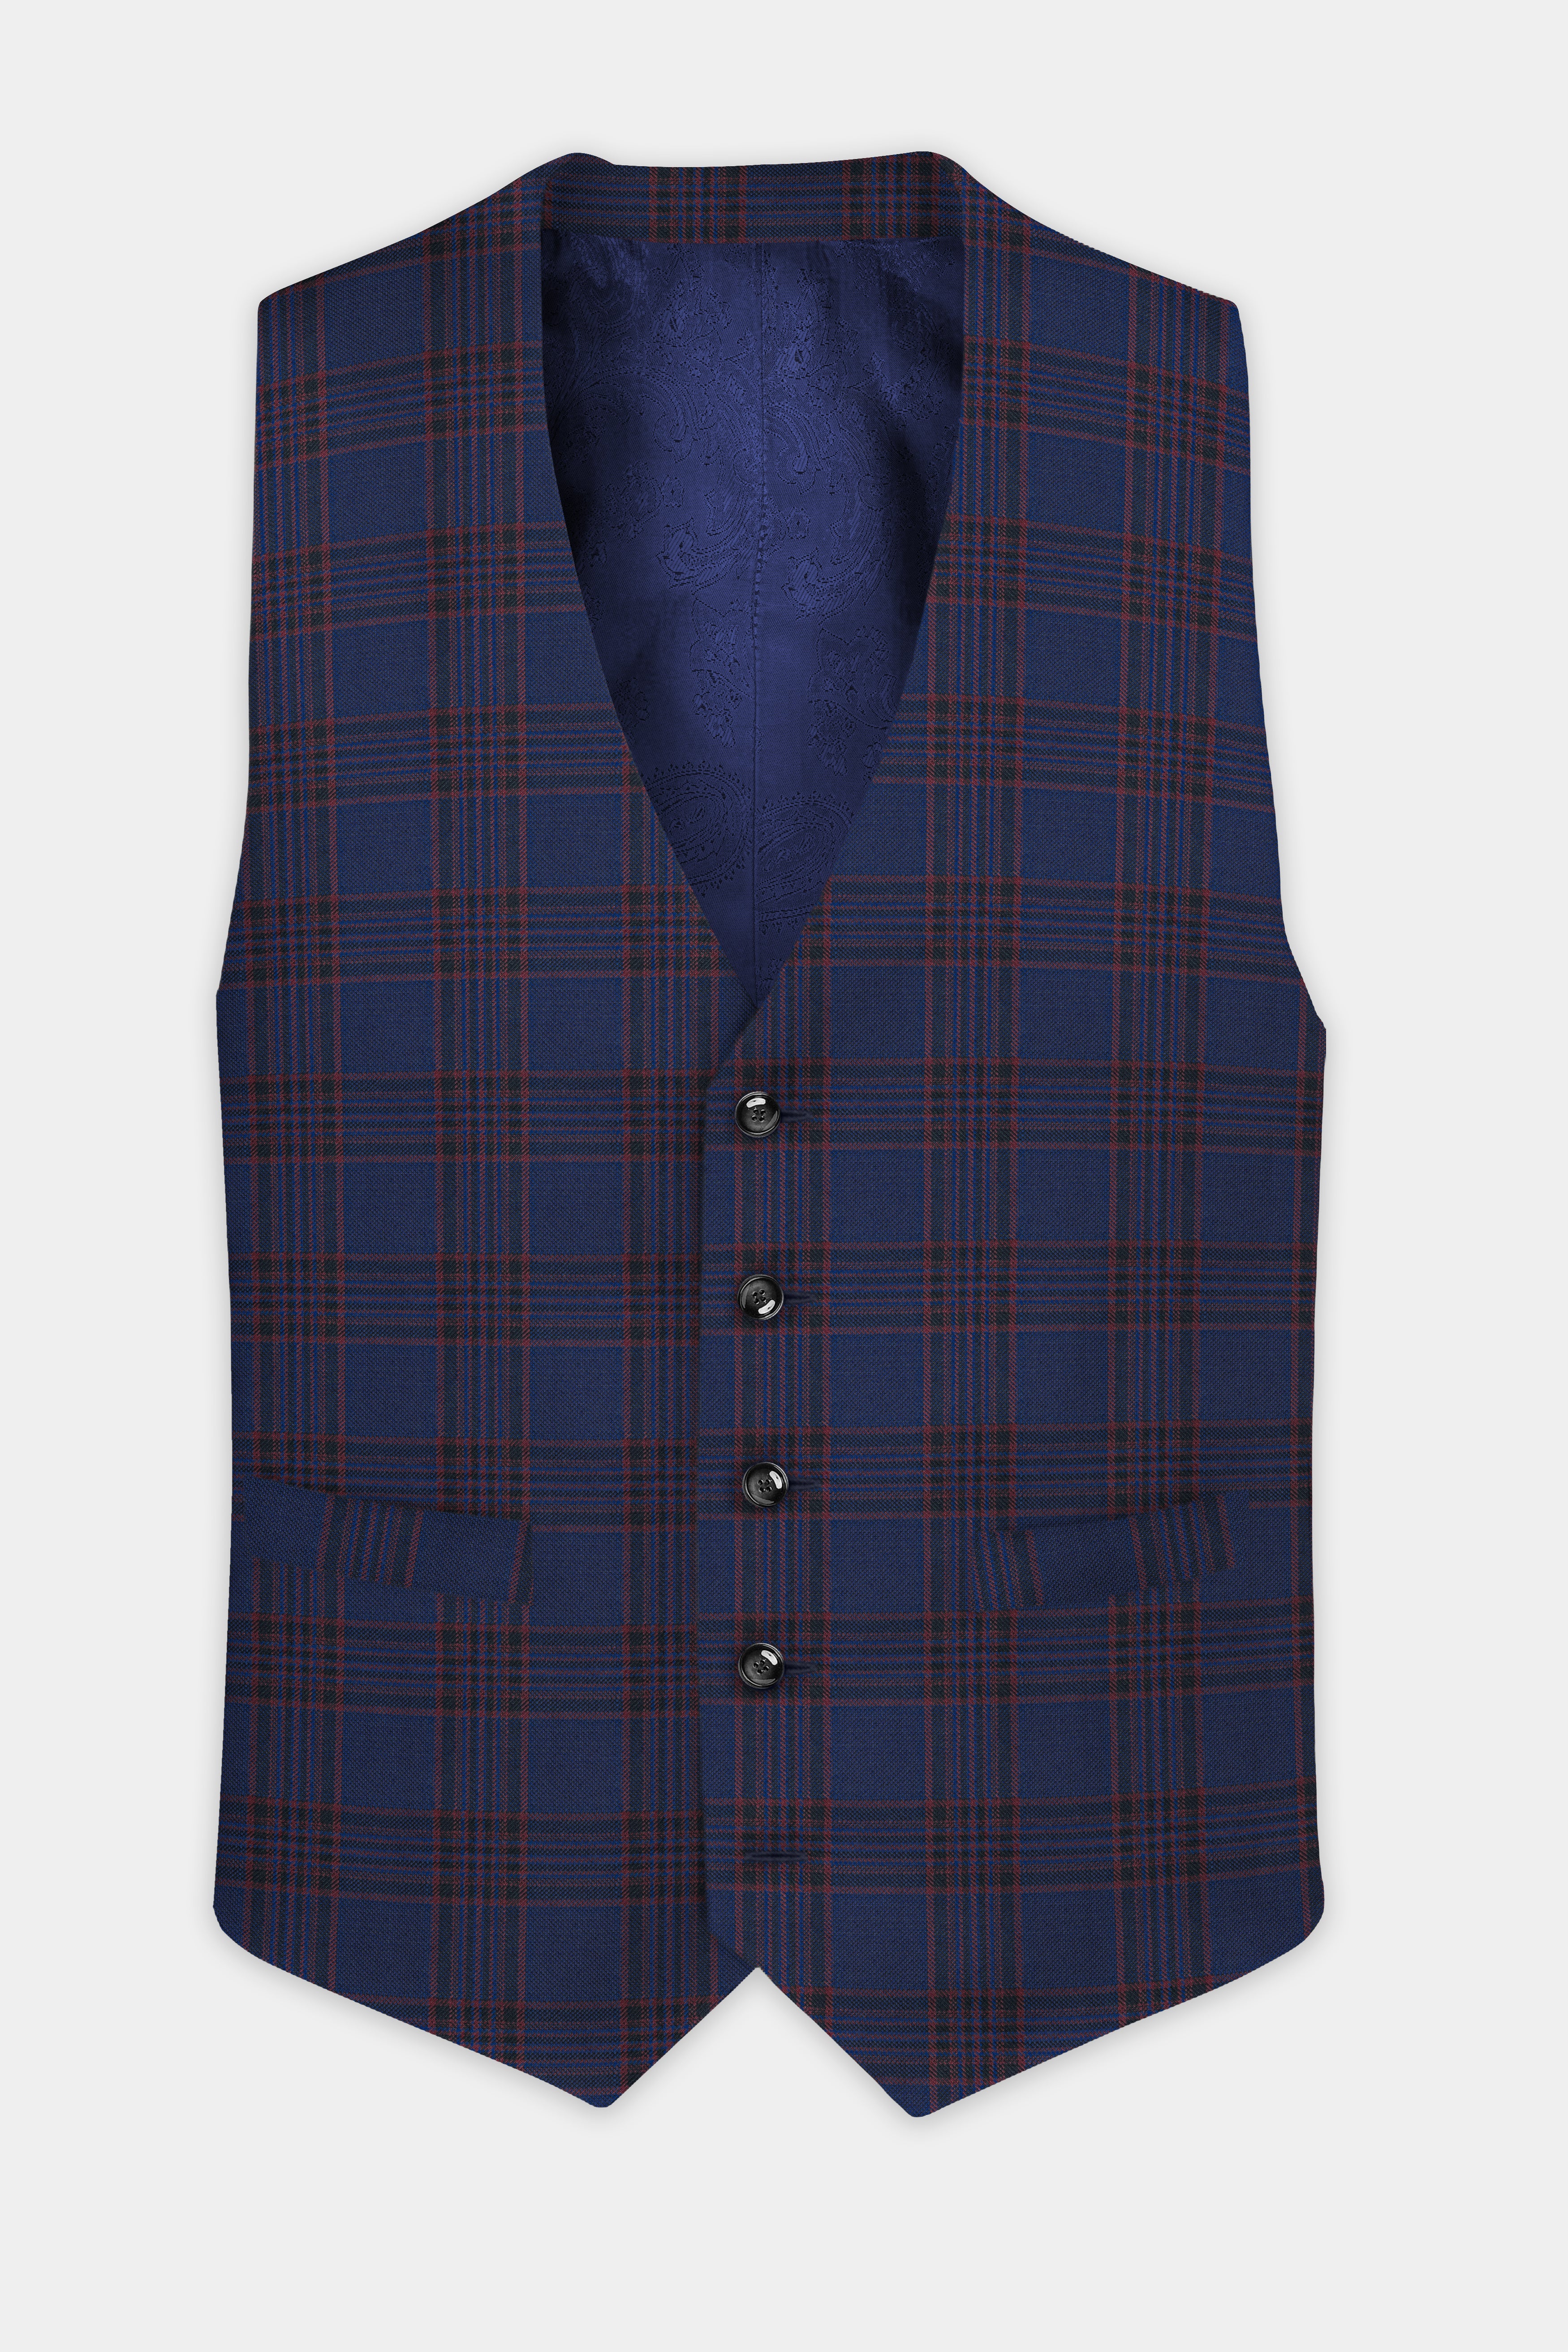 Bunting Blue with Livid Brown Plaid Wool Blend Waistcoat